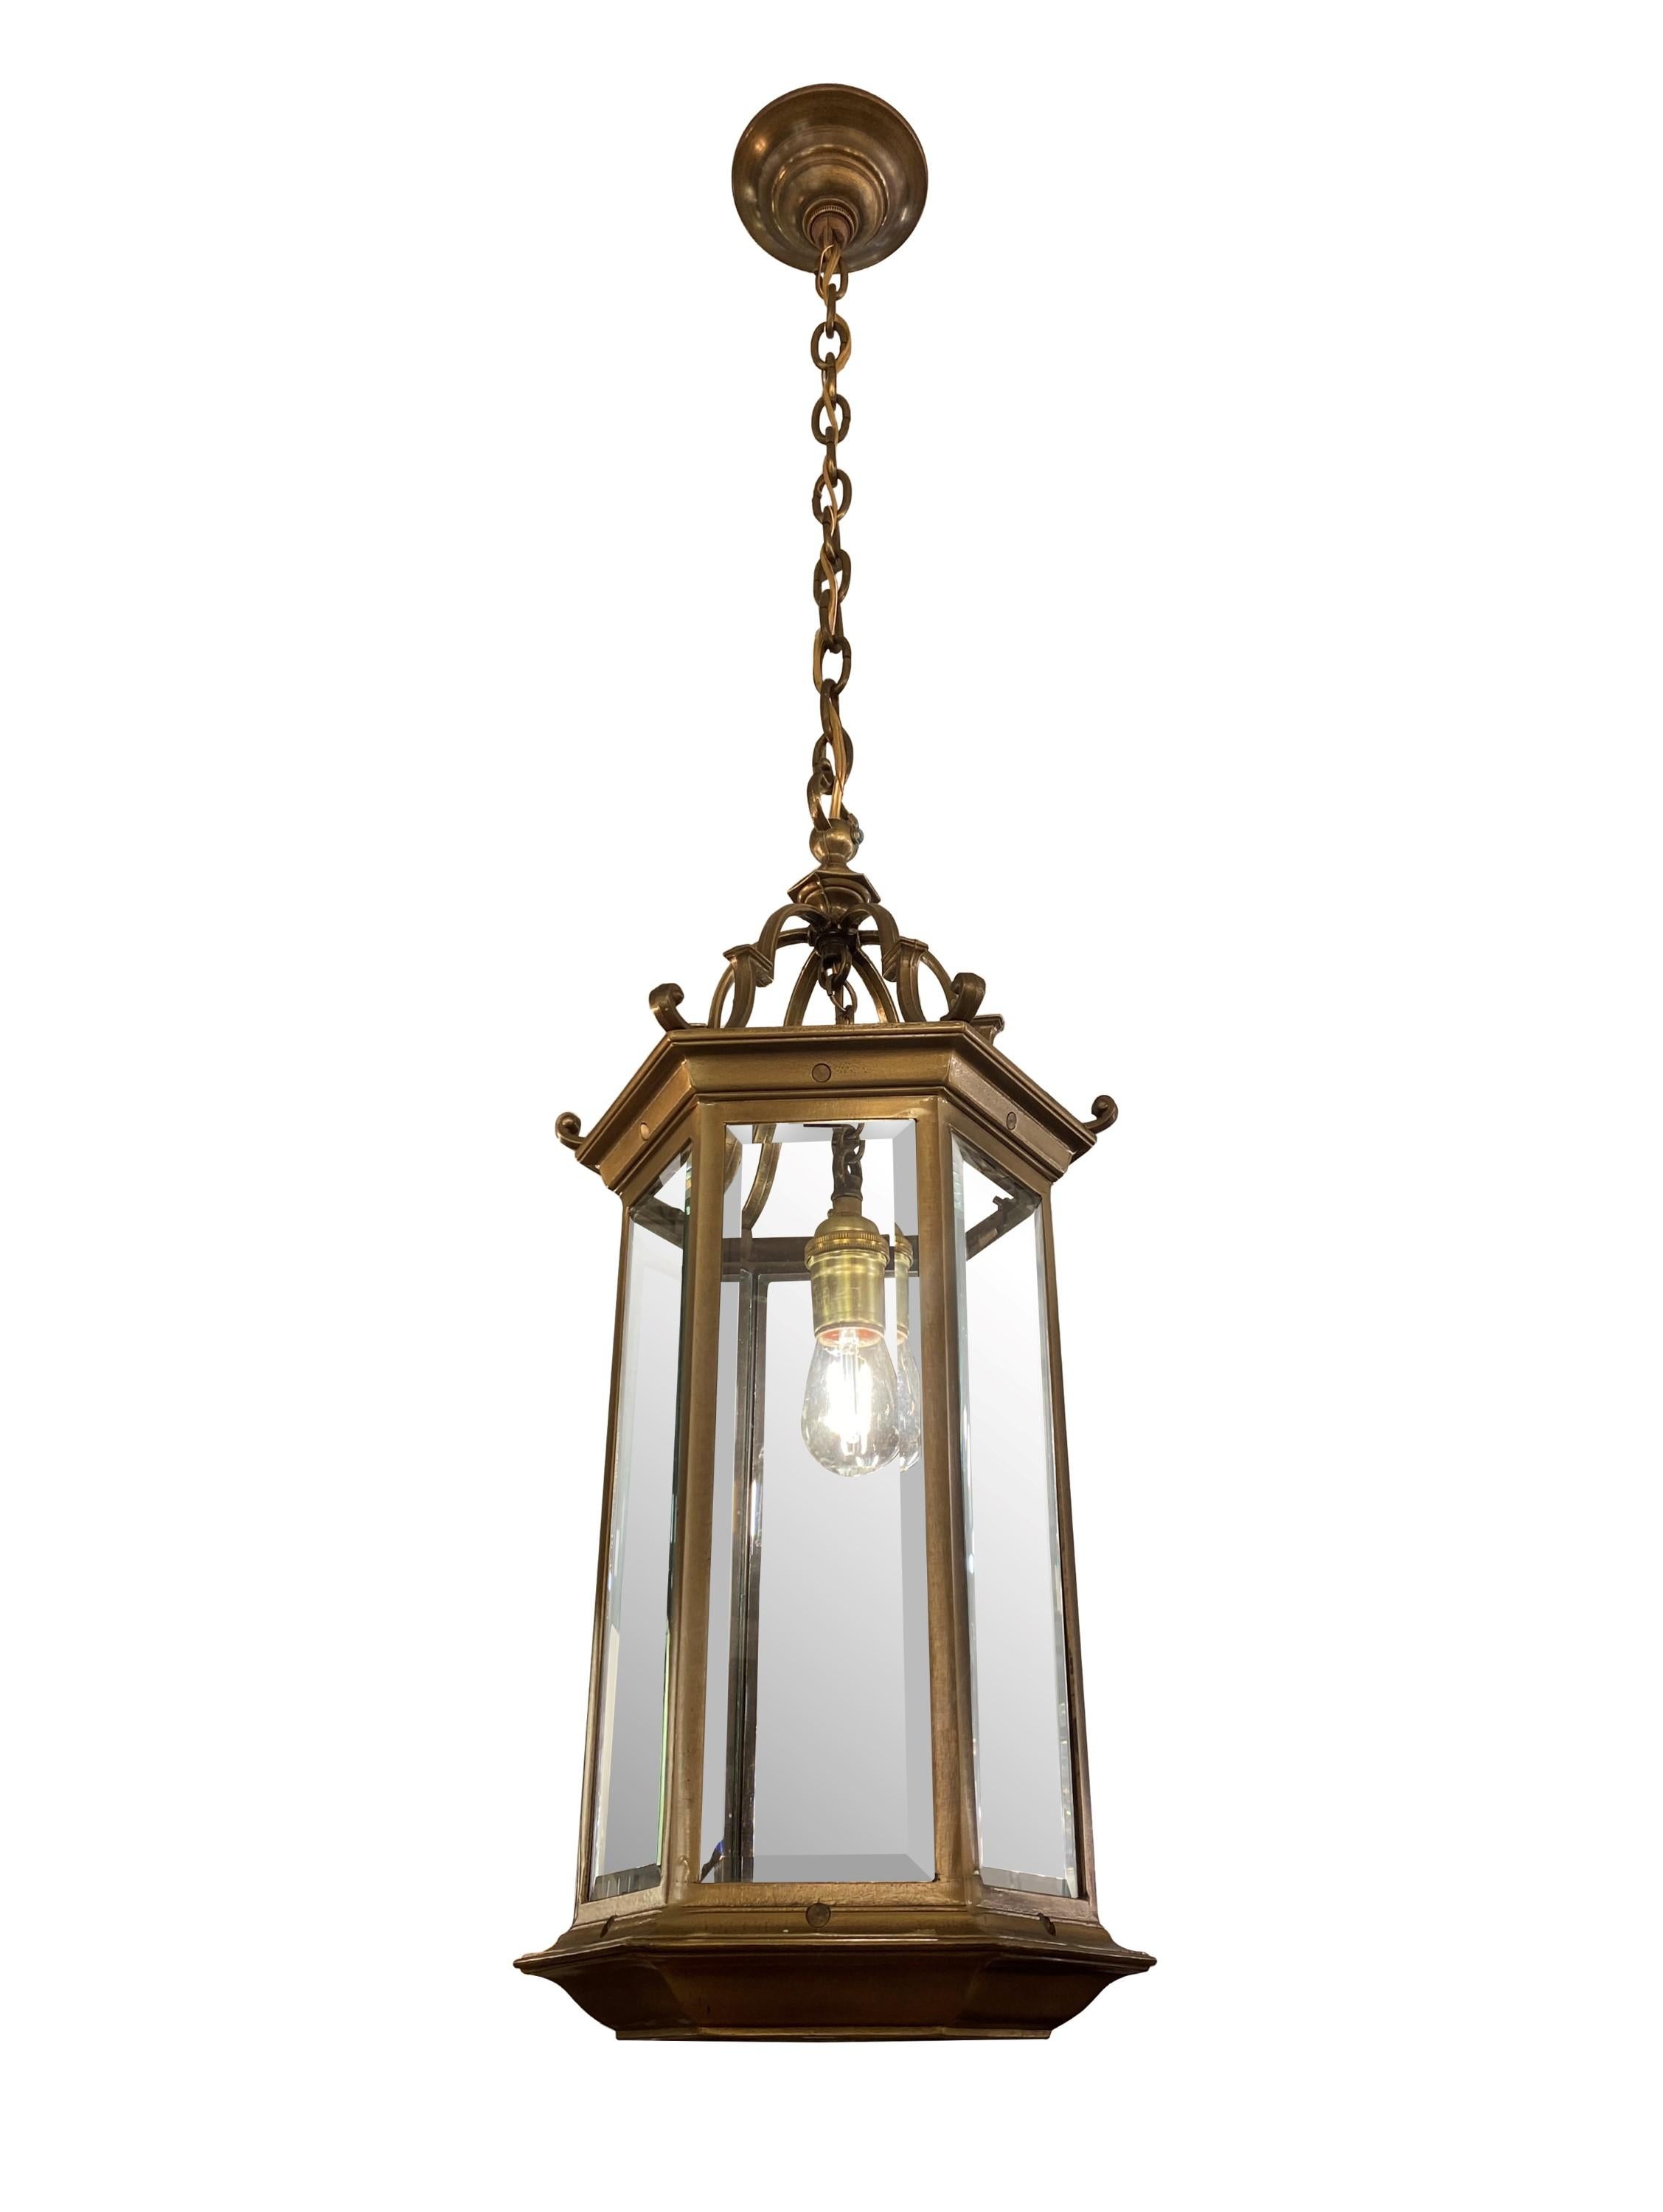 20th century hexagon design bronze foyer lantern featuring six beveled glass panes. Cleaned and restored. Please note, this item is located in one of our NYC locations.